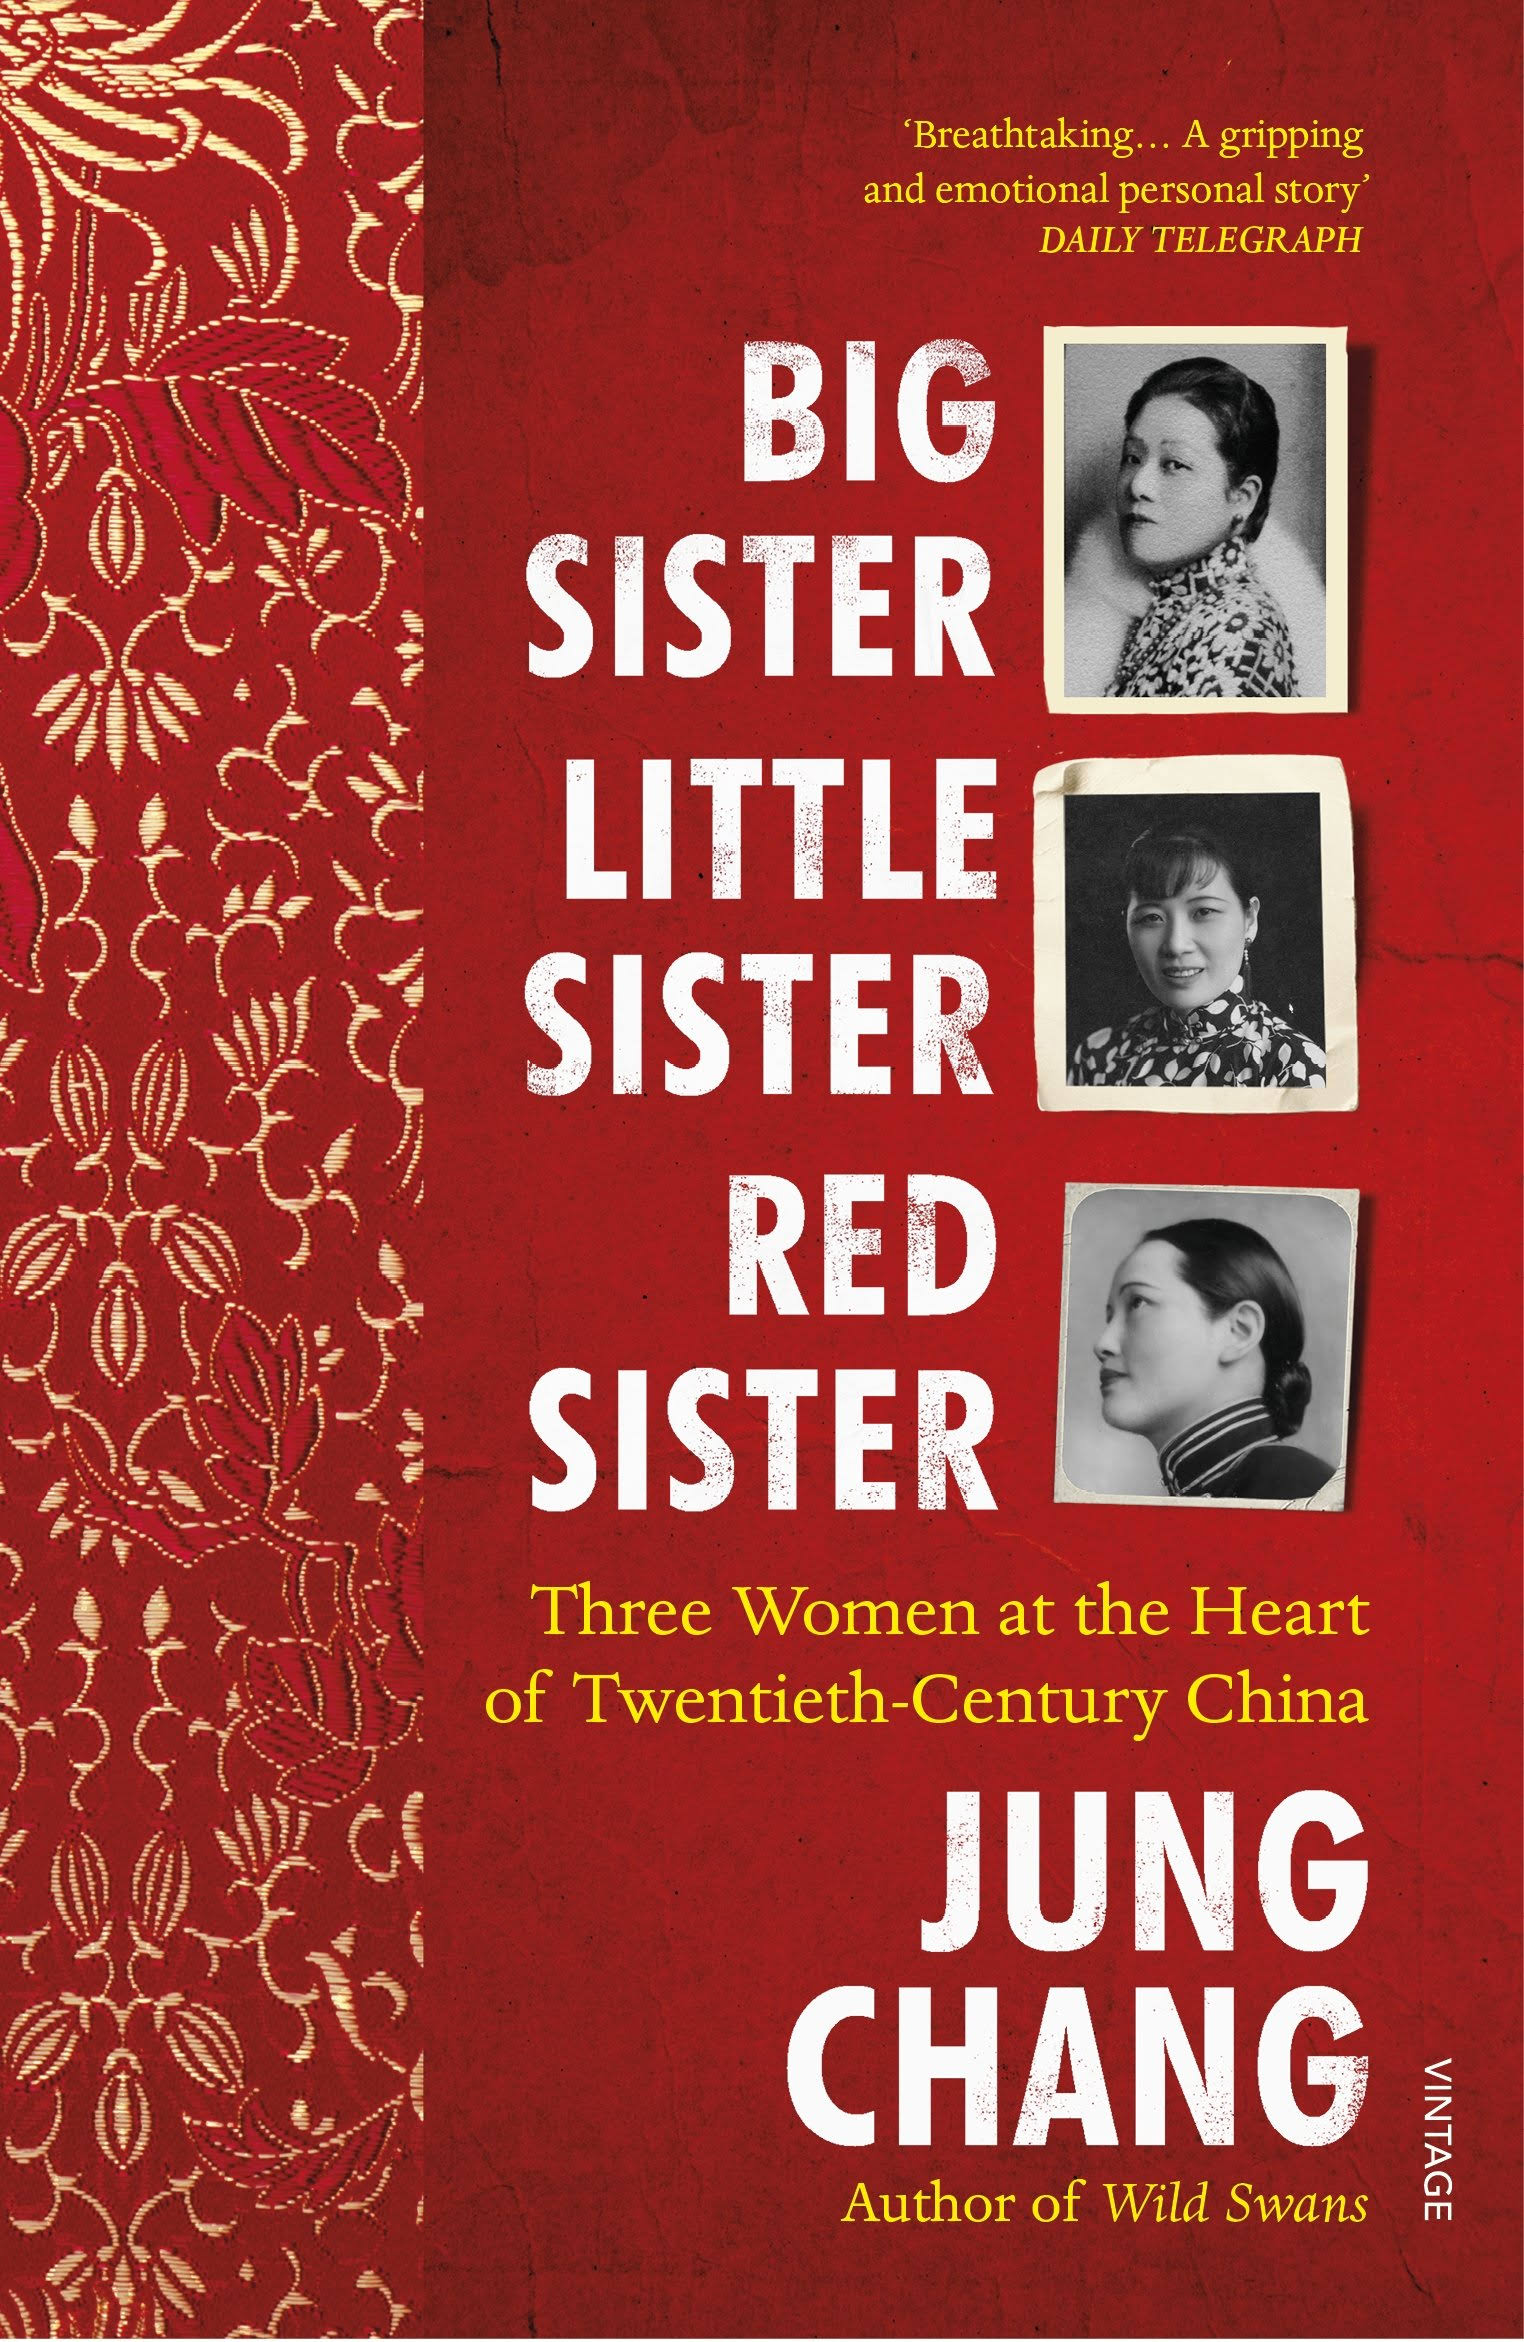 Big Sister, Little Sister, Red Sister by Jung Chang: Three Women at The Heart of Twentieth-Century China